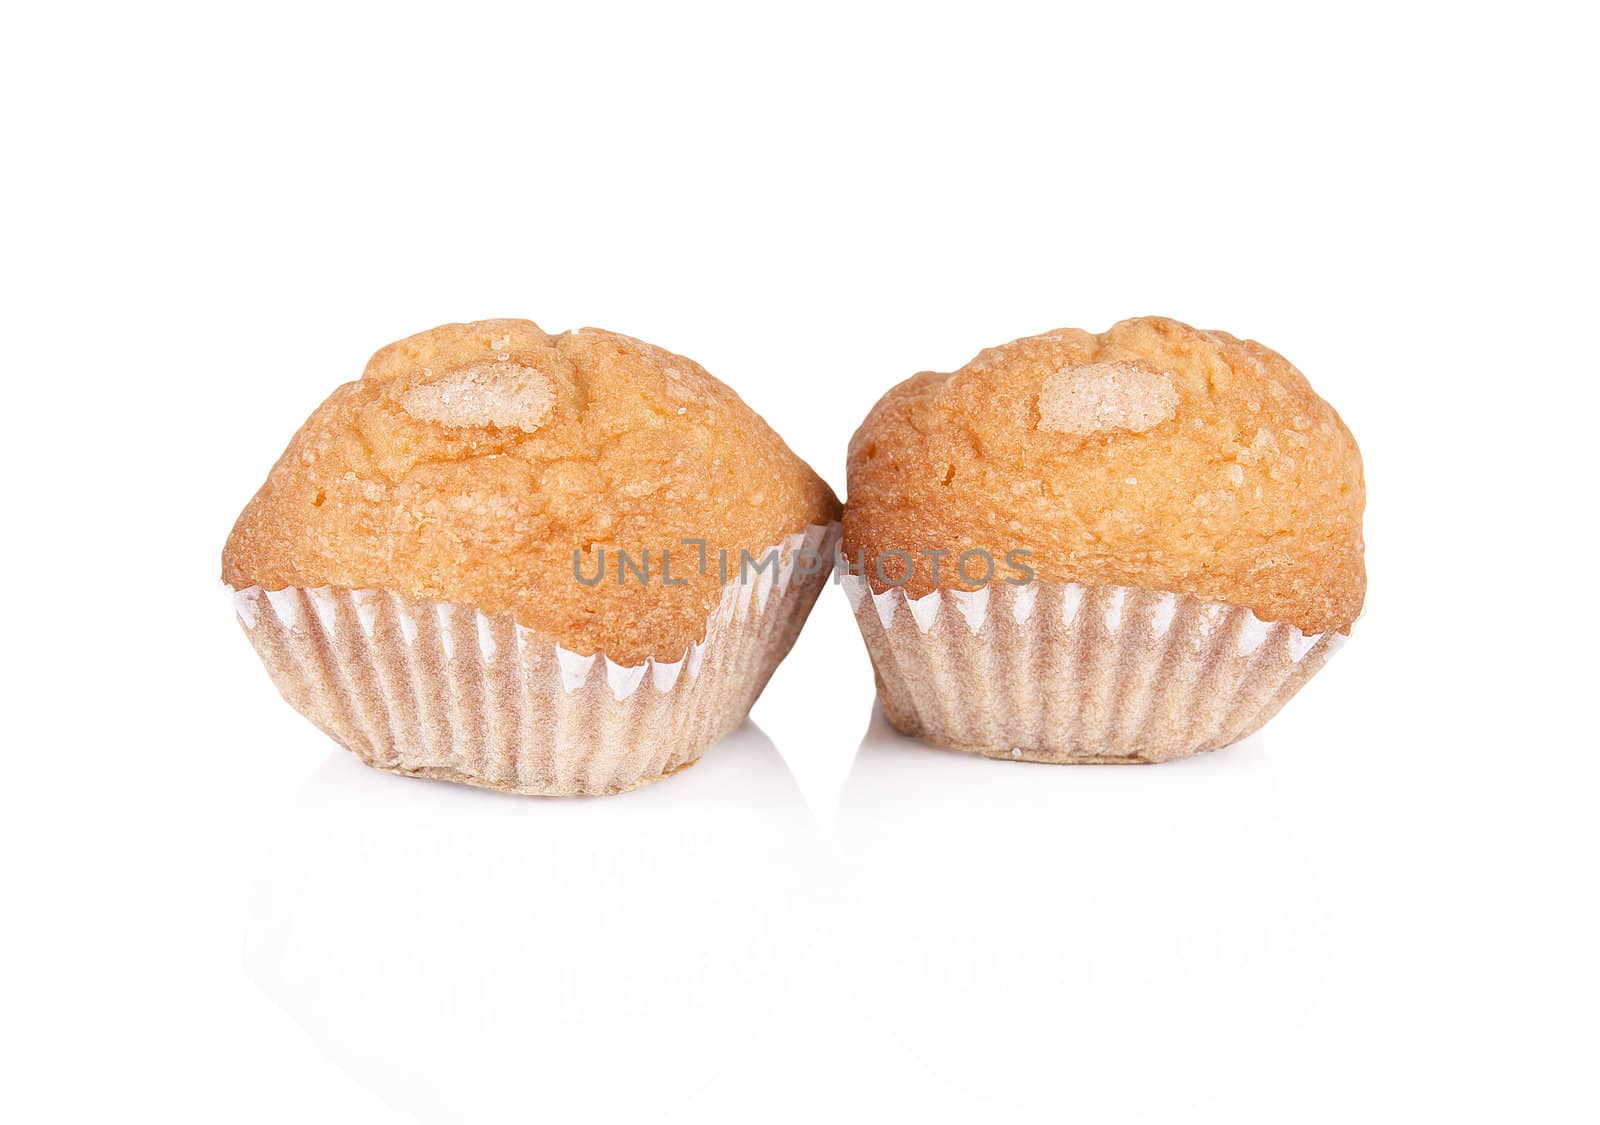 Pair of cupcakes over white isolated background by HERRAEZ